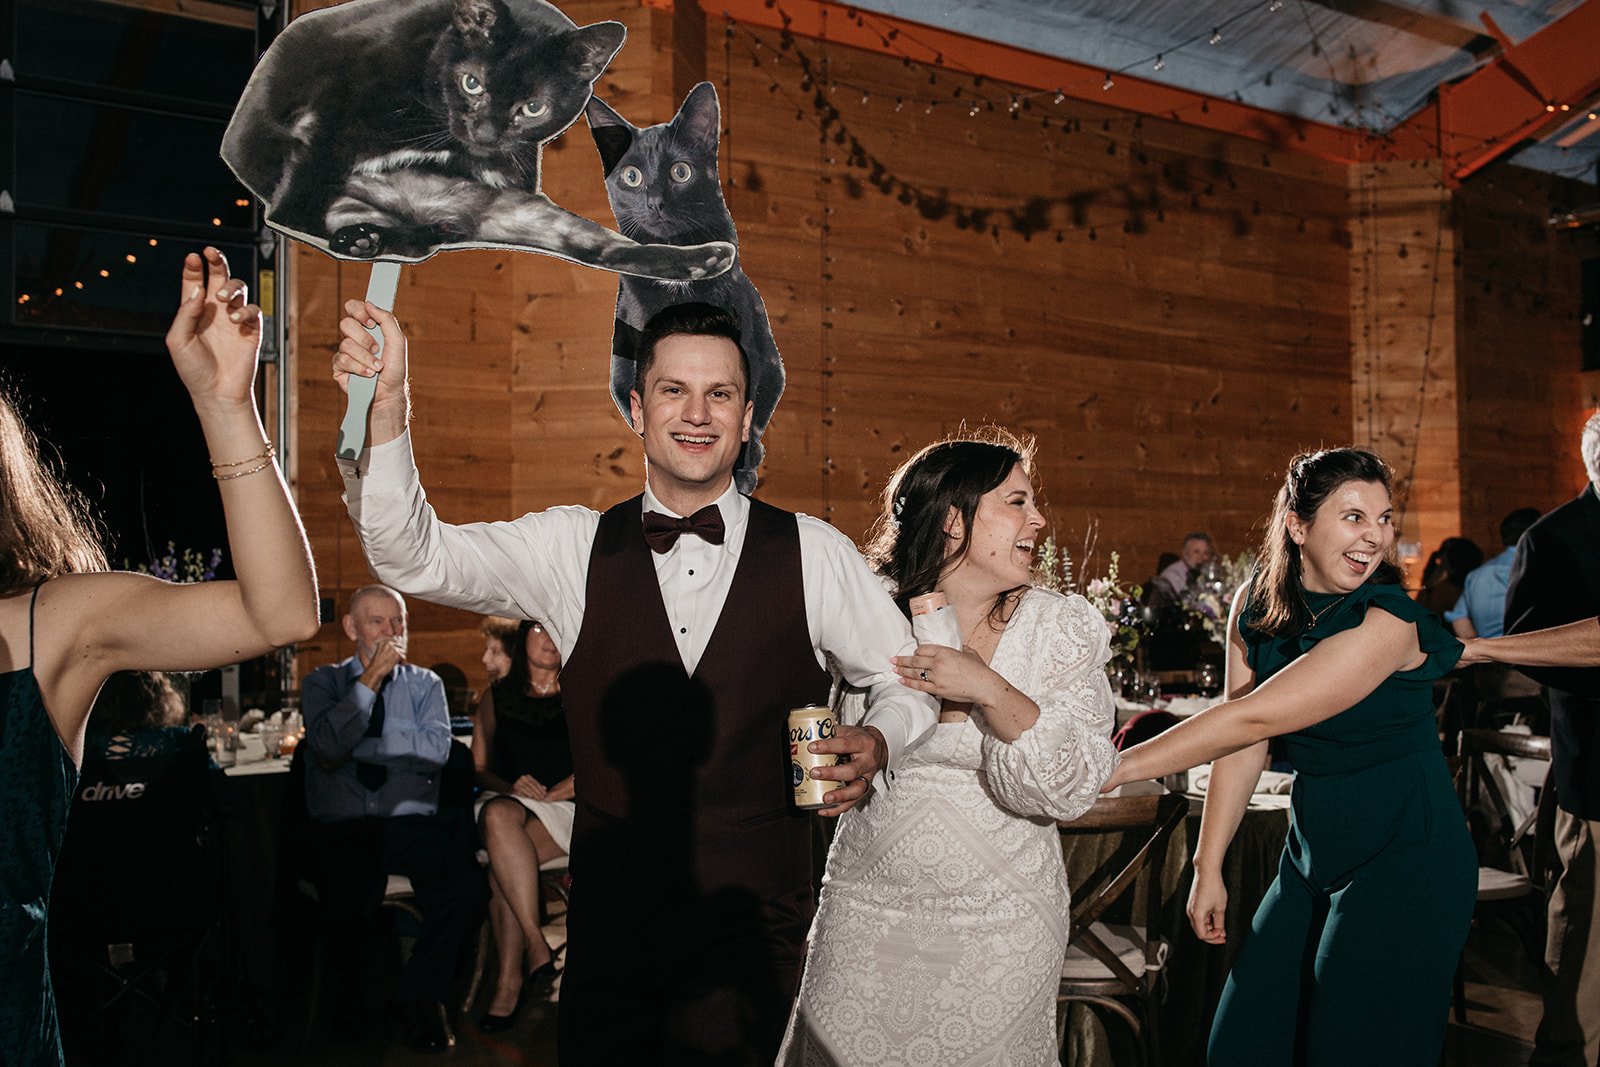 A groom with a cardboard cut out of his cat.